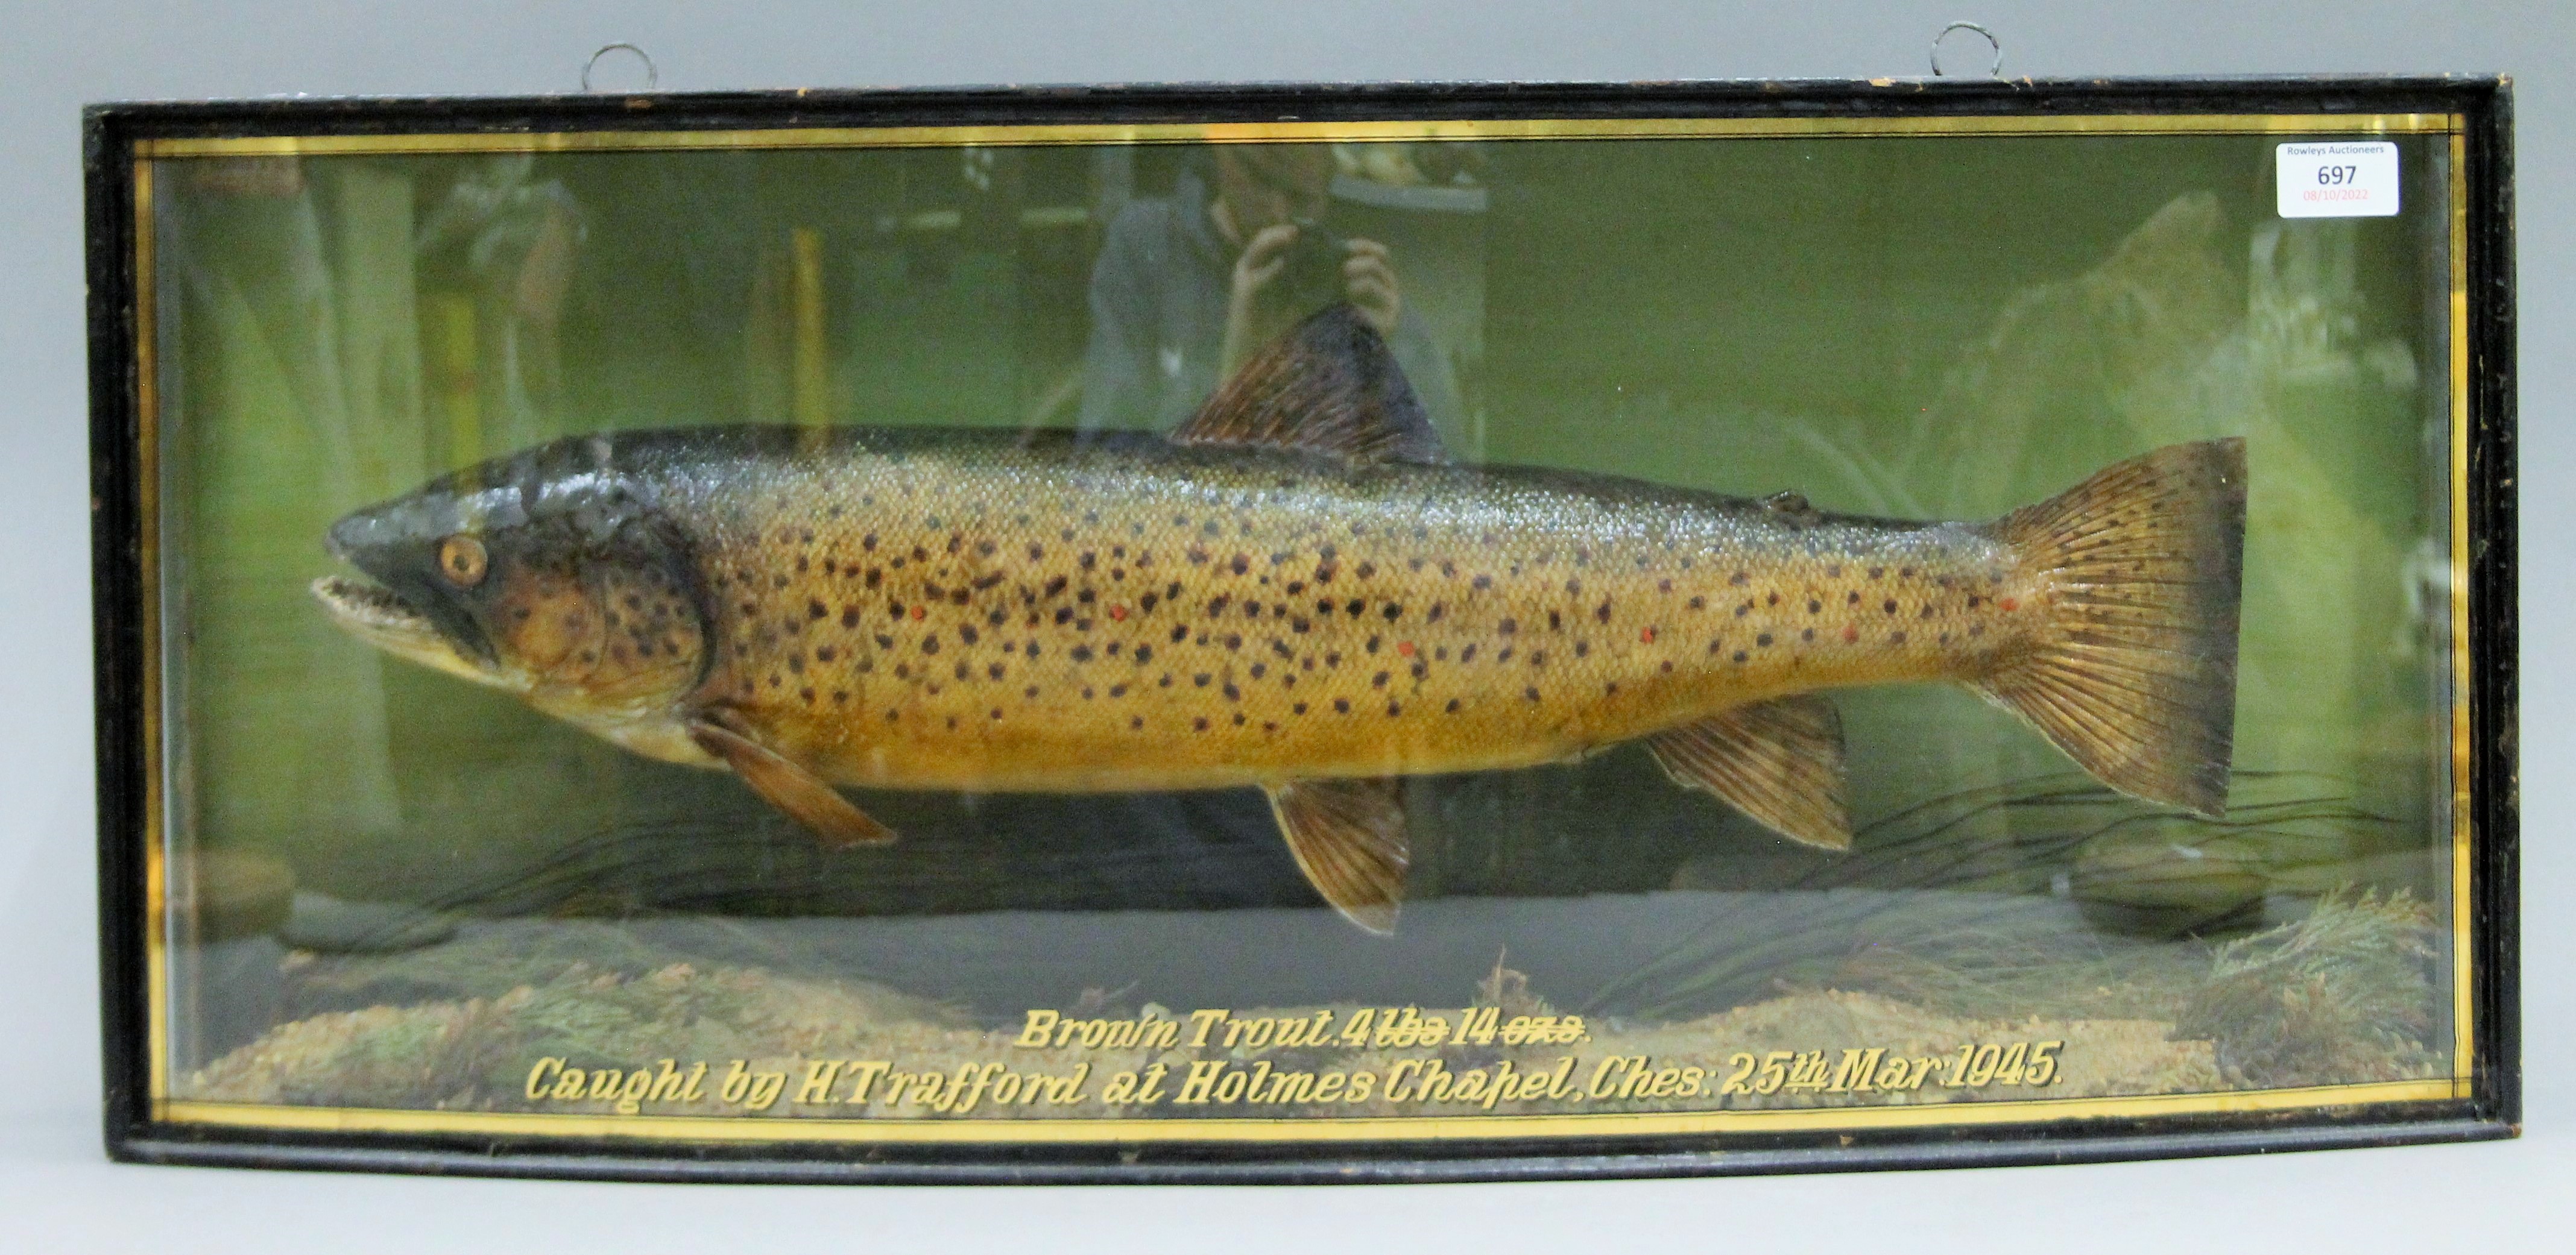 A taxidermy specimen of a preserved Brown Trout (Salmo trutta) by J Cooper & Sons (Griggs) mounted